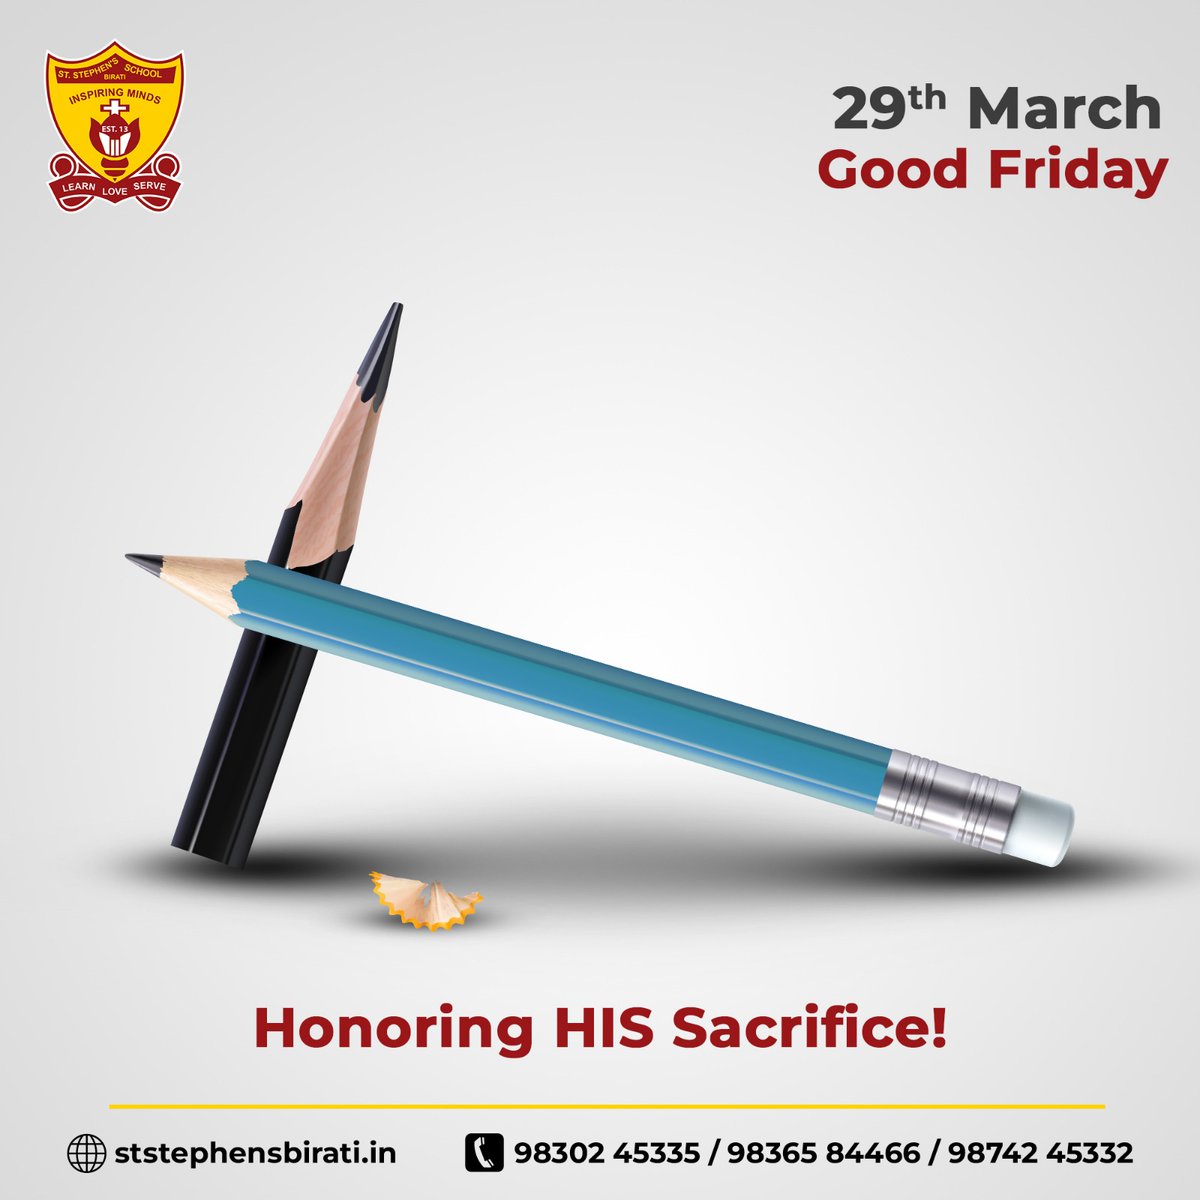 On this solemn Good Friday, we honor His sacrifice and reflect on the profound love and grace He bestowed upon us. #StStephensSchool #StStephensSchoolBirati #GoodFriday #LordJesus #GoodFriday2024